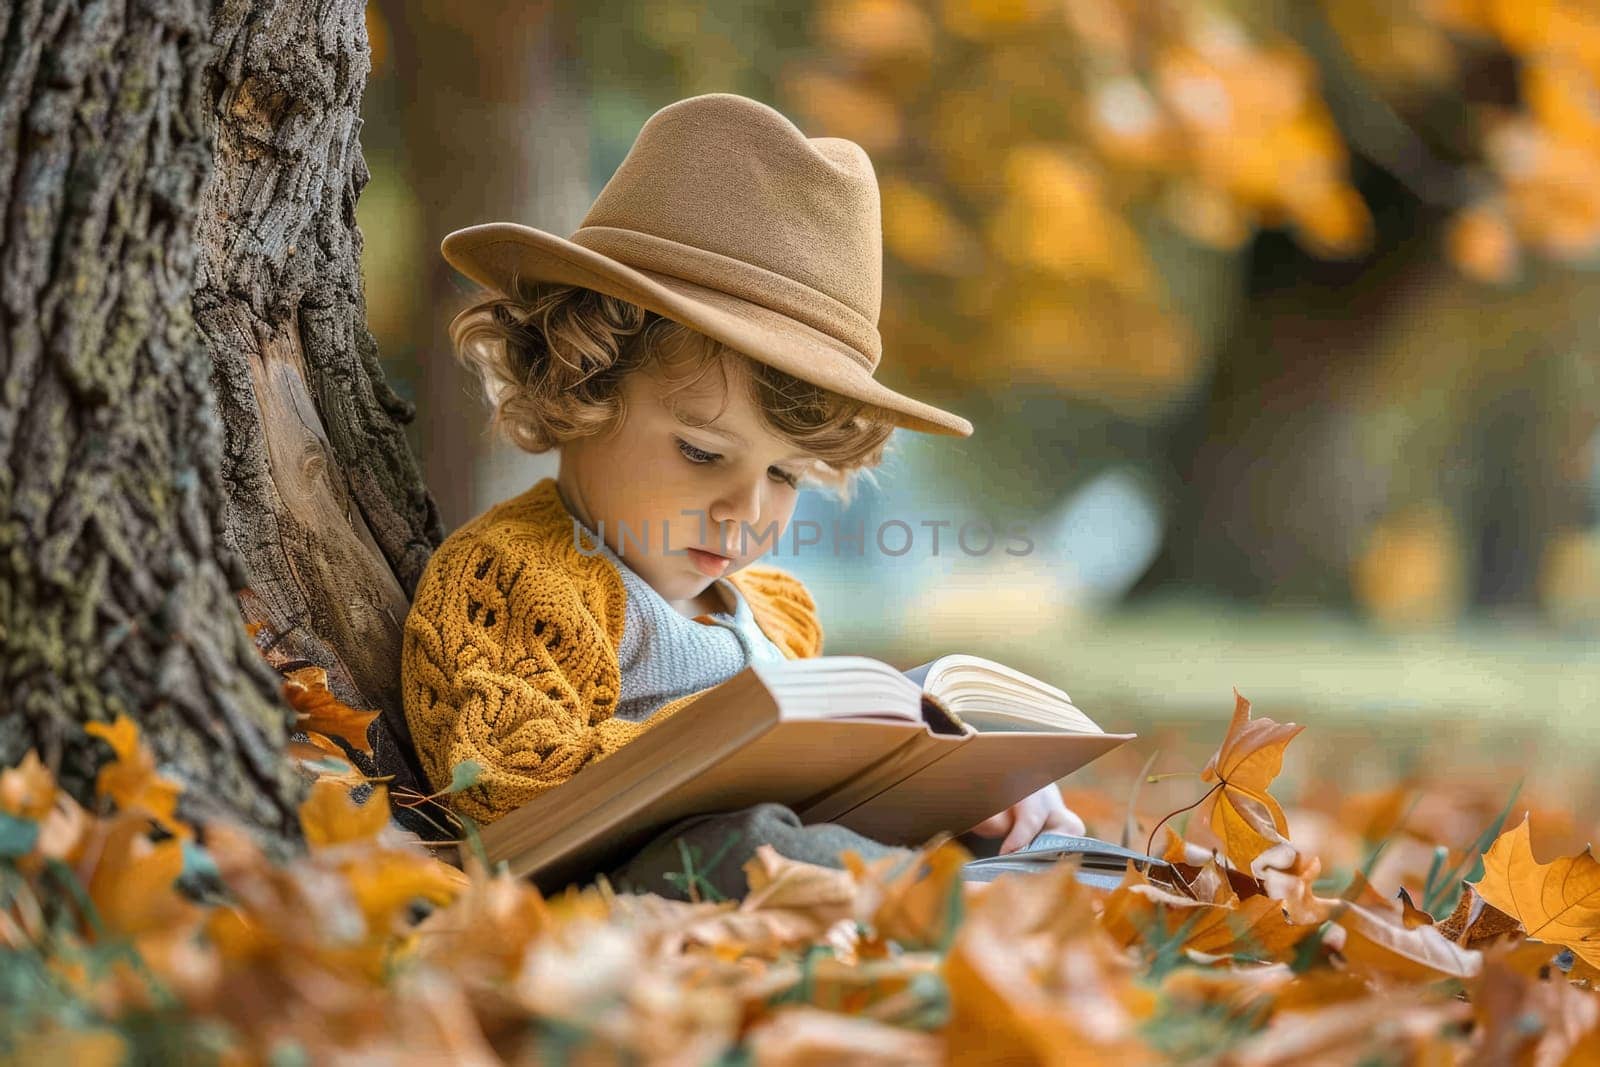 Cute child reading book under tree in autumn park. Concept of imagination, childhood, and fall season. by ailike